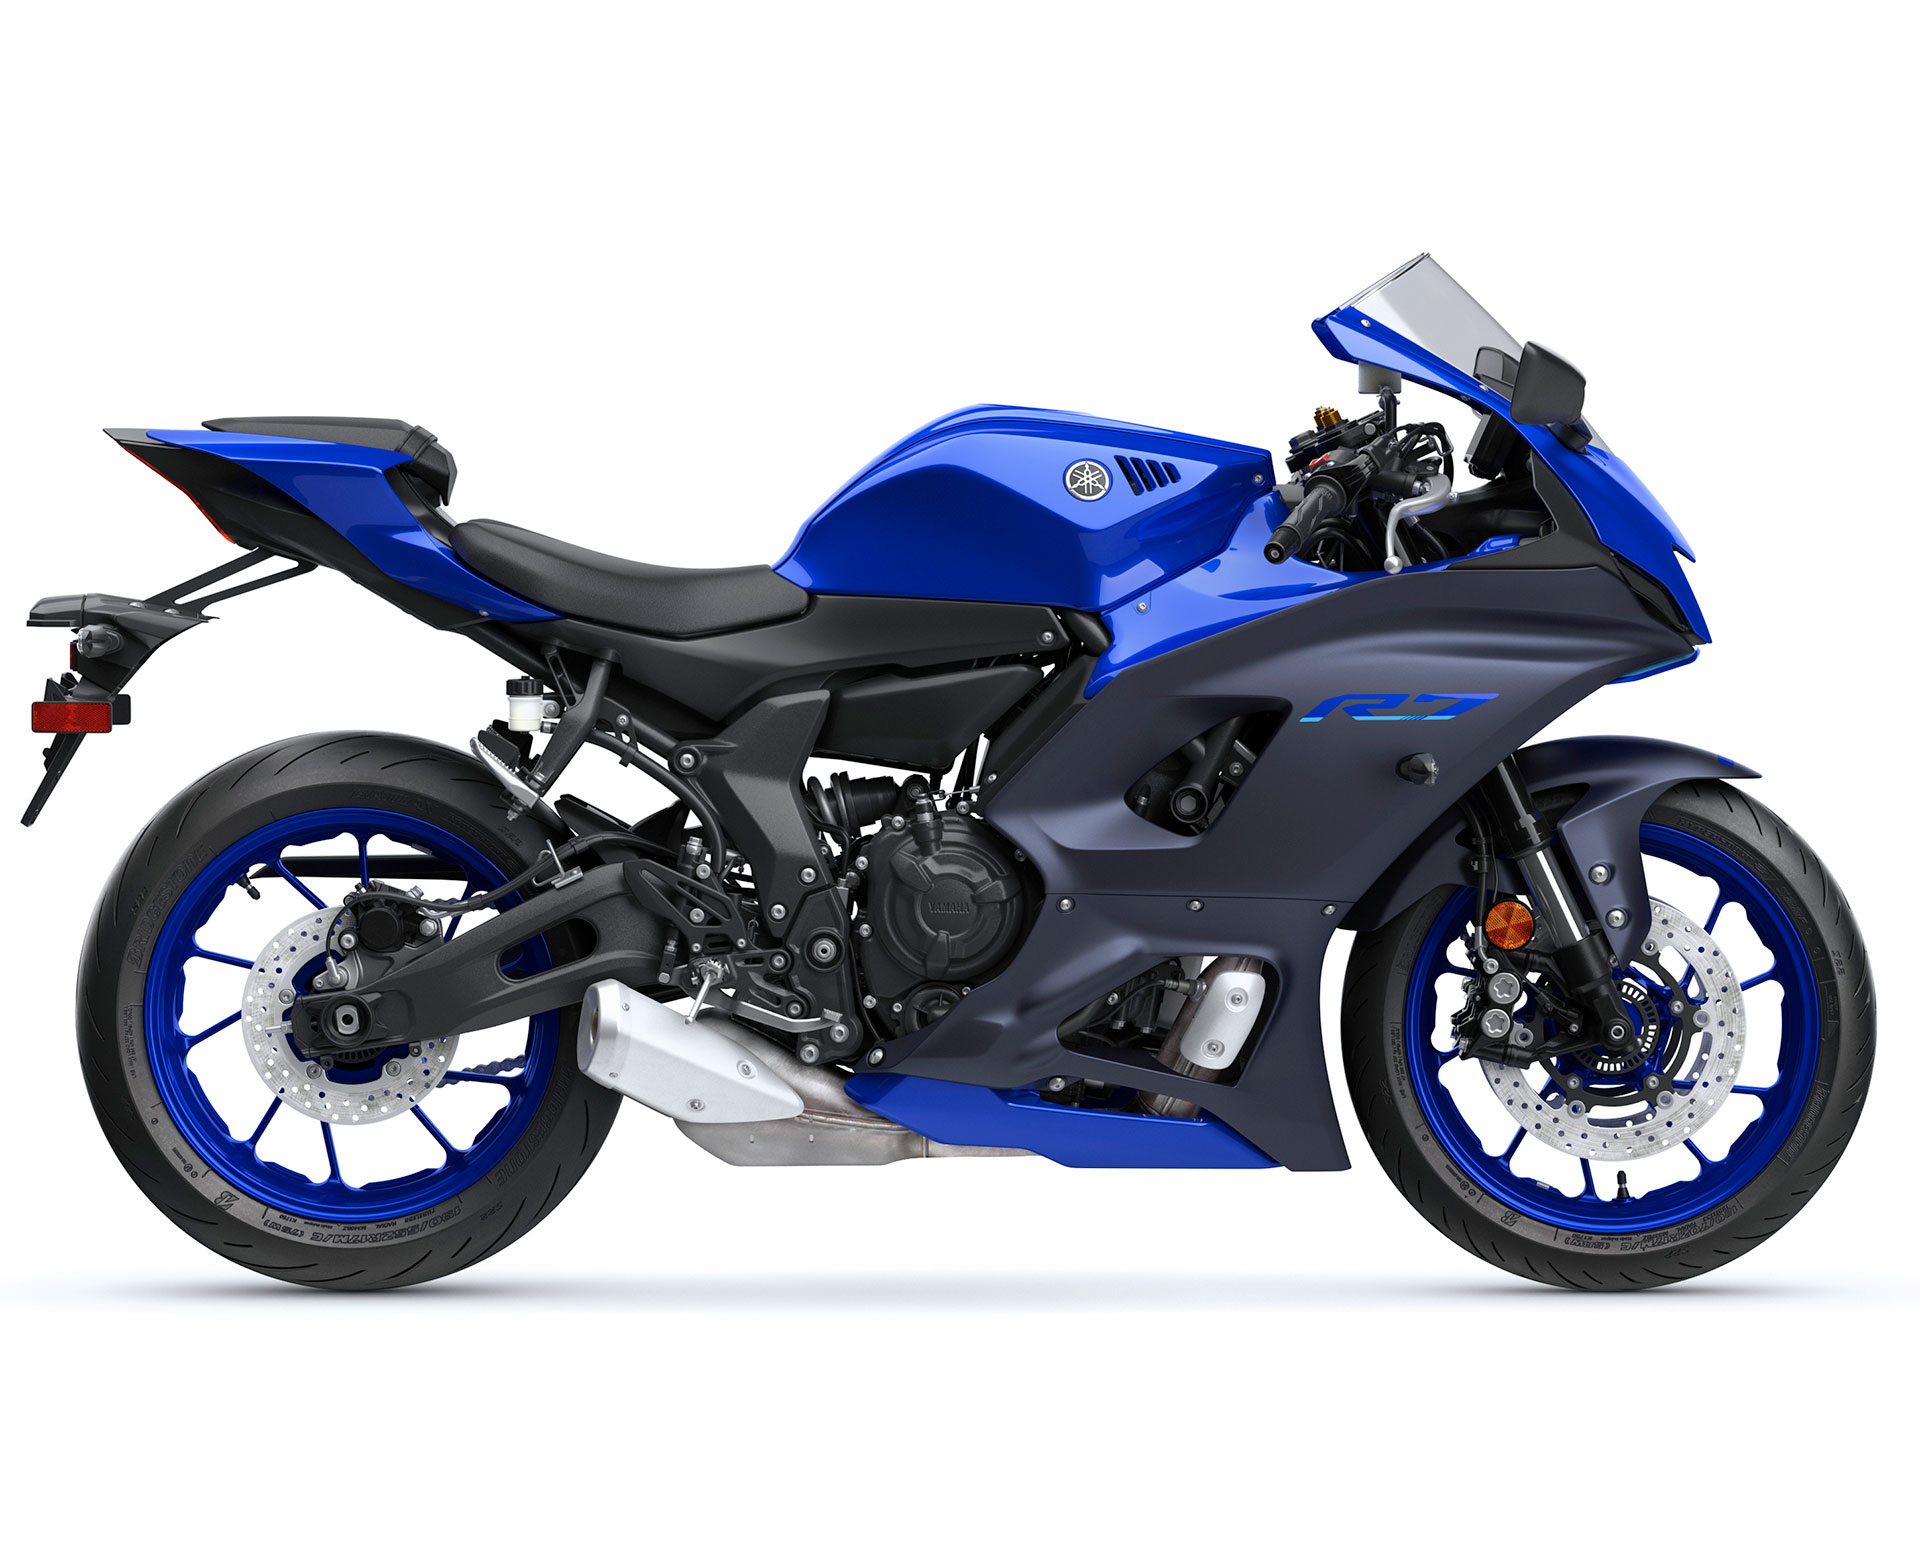 Thumbnail of your customized YZF-R7 2023